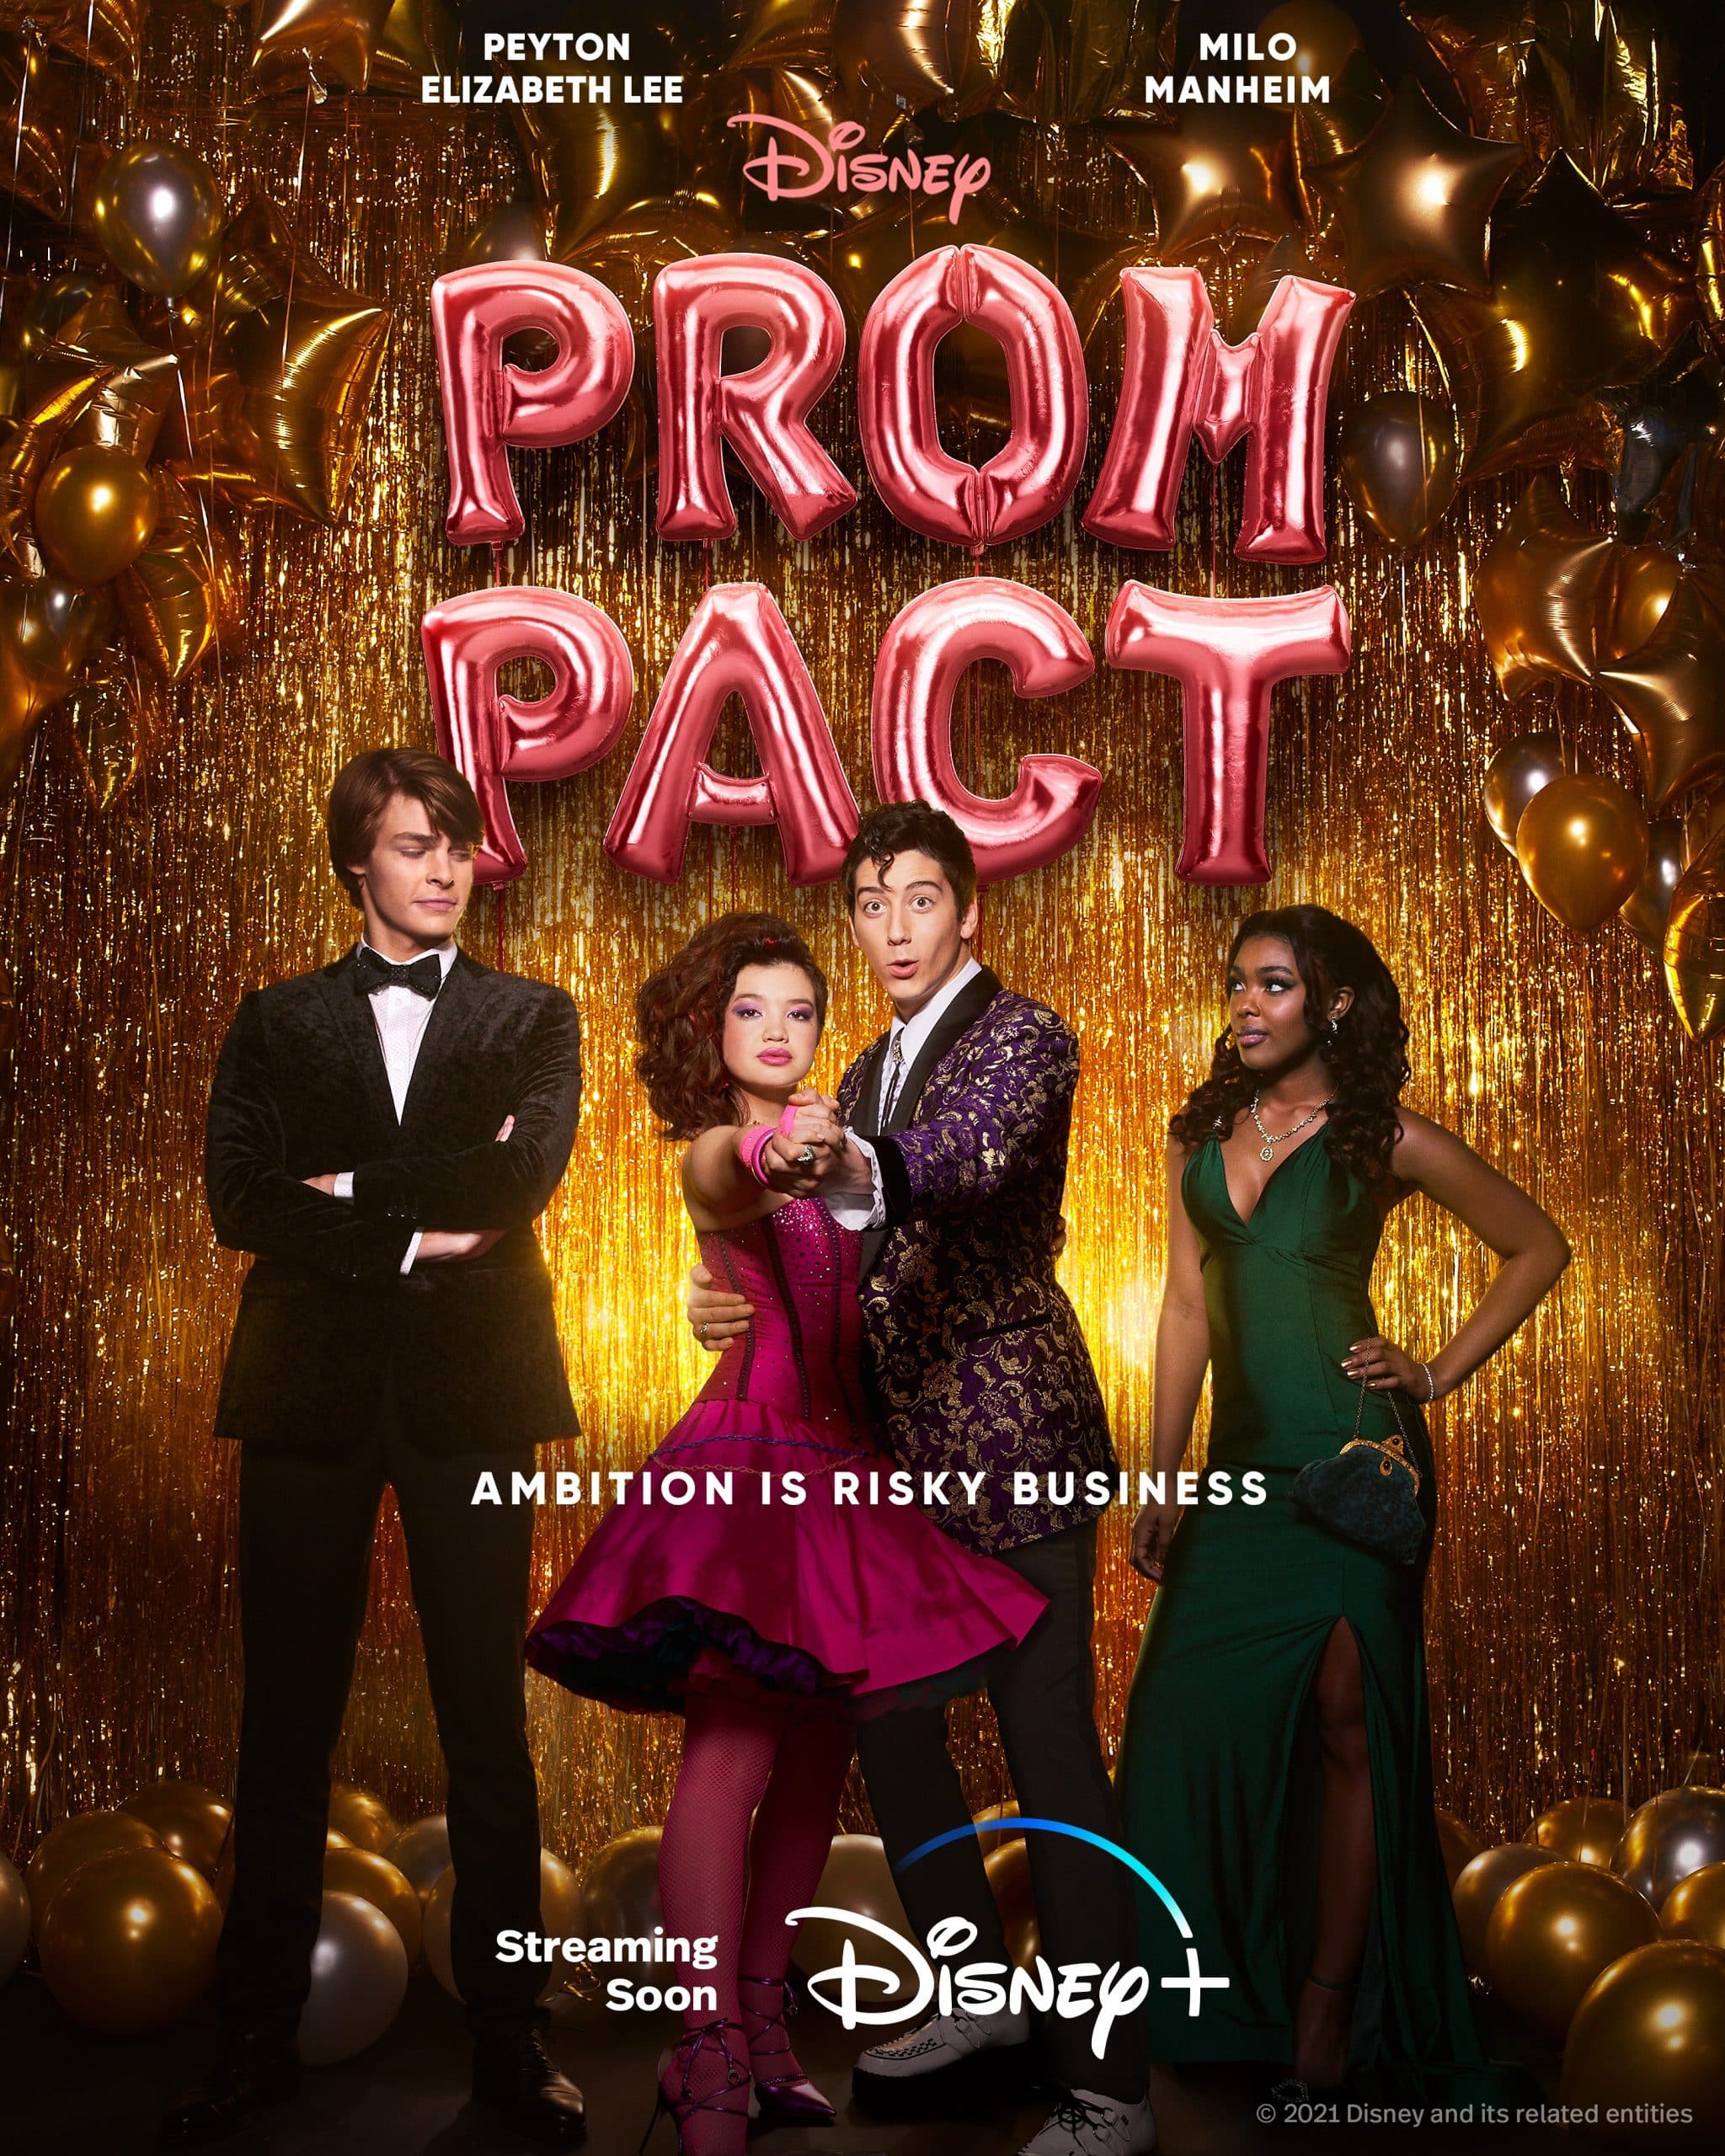 “Prom Pact” Poster Released What's On Disney Plus